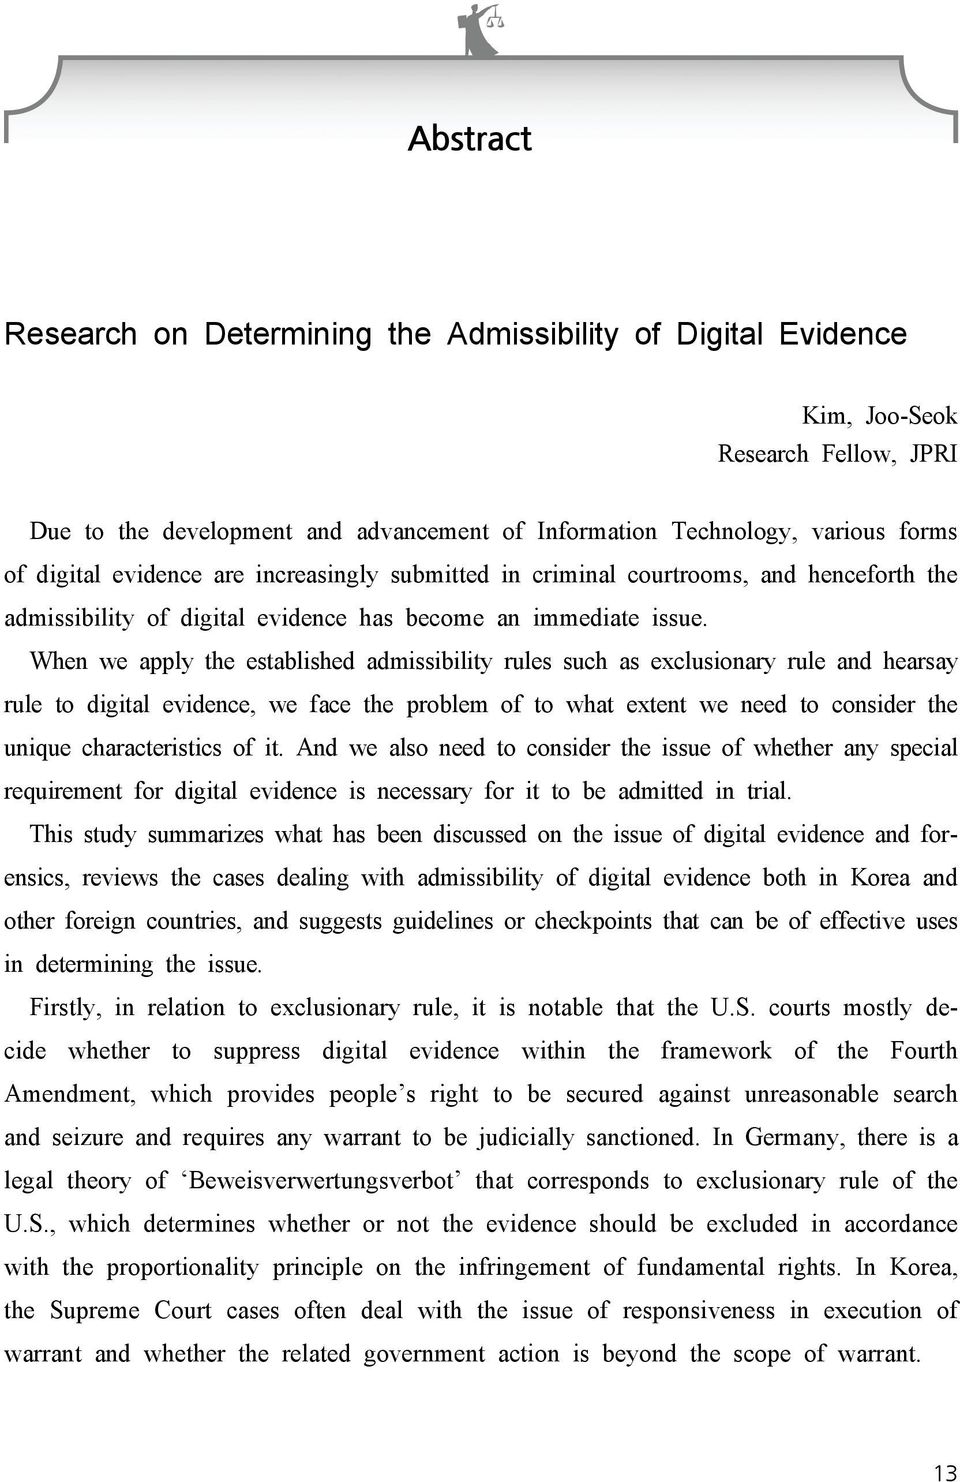 When we apply the established admissibility rules such as exclusionary rule and hearsay rule to digital evidence, we face the problem of to what extent we need to consider the unique characteristics